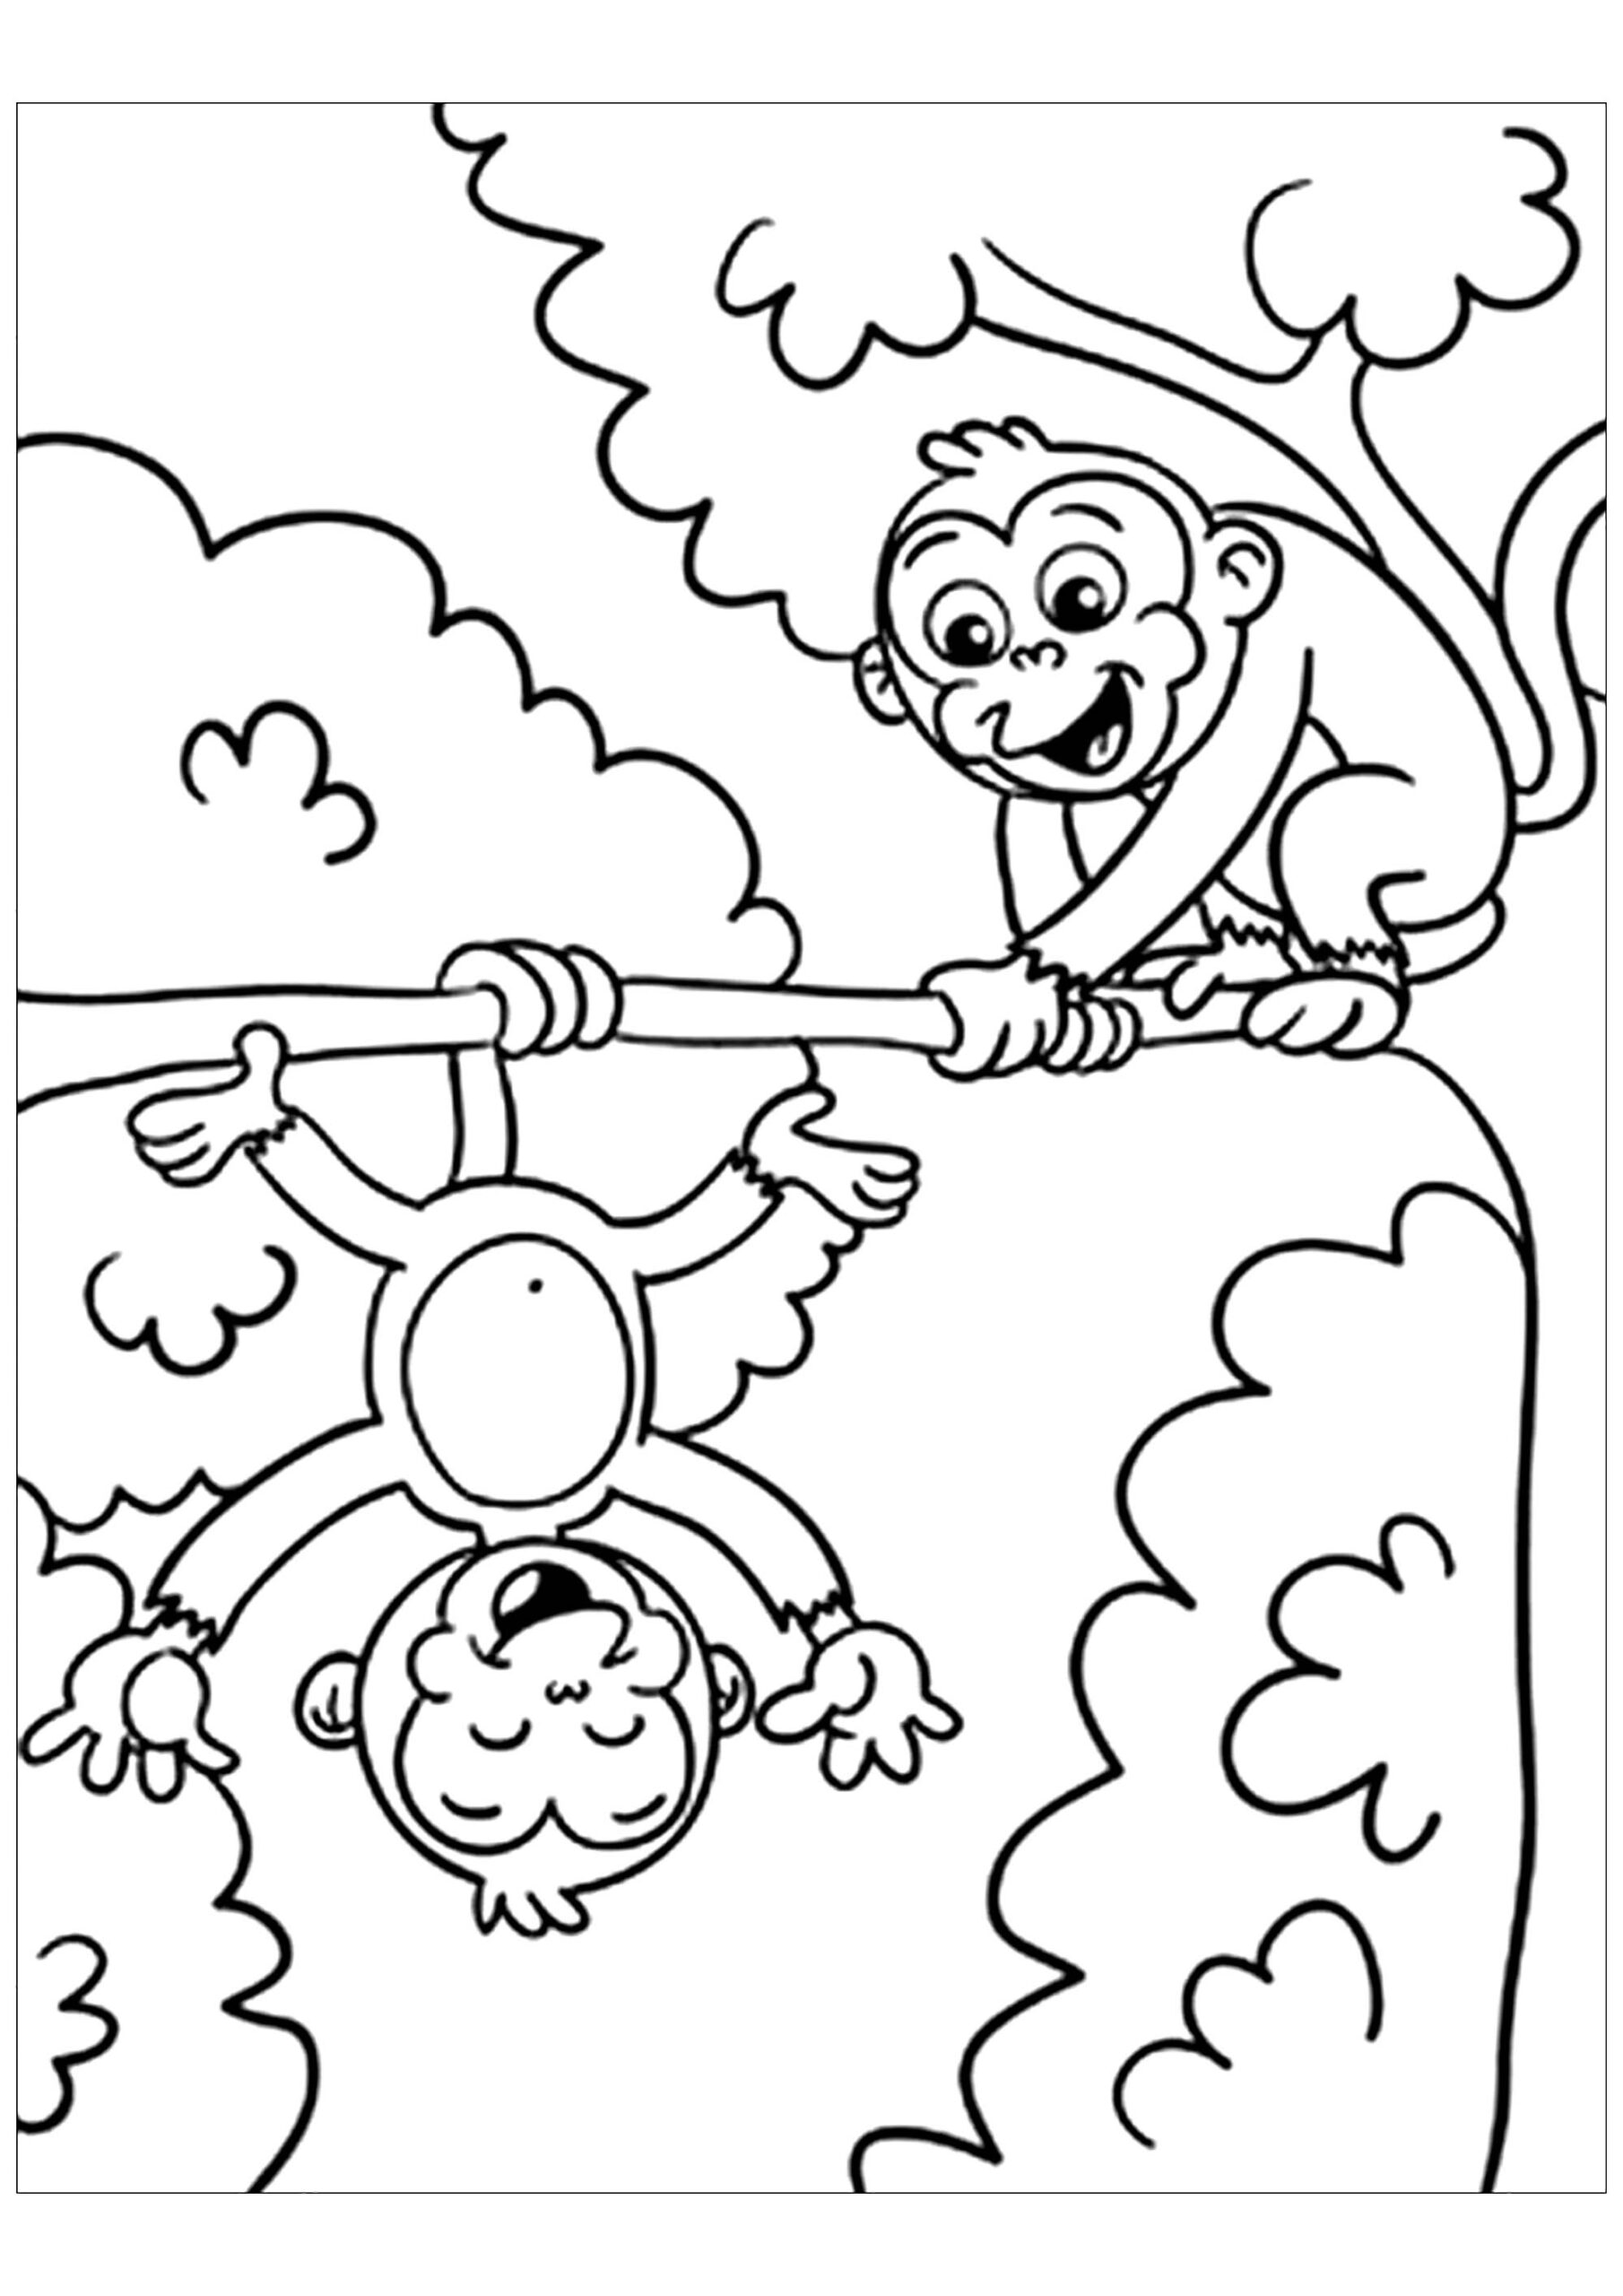 Free Monkey Drawing To Print And Color - Monkeys Kids Coloring Pages pertaining to Free Printable Monkey Coloring Pages